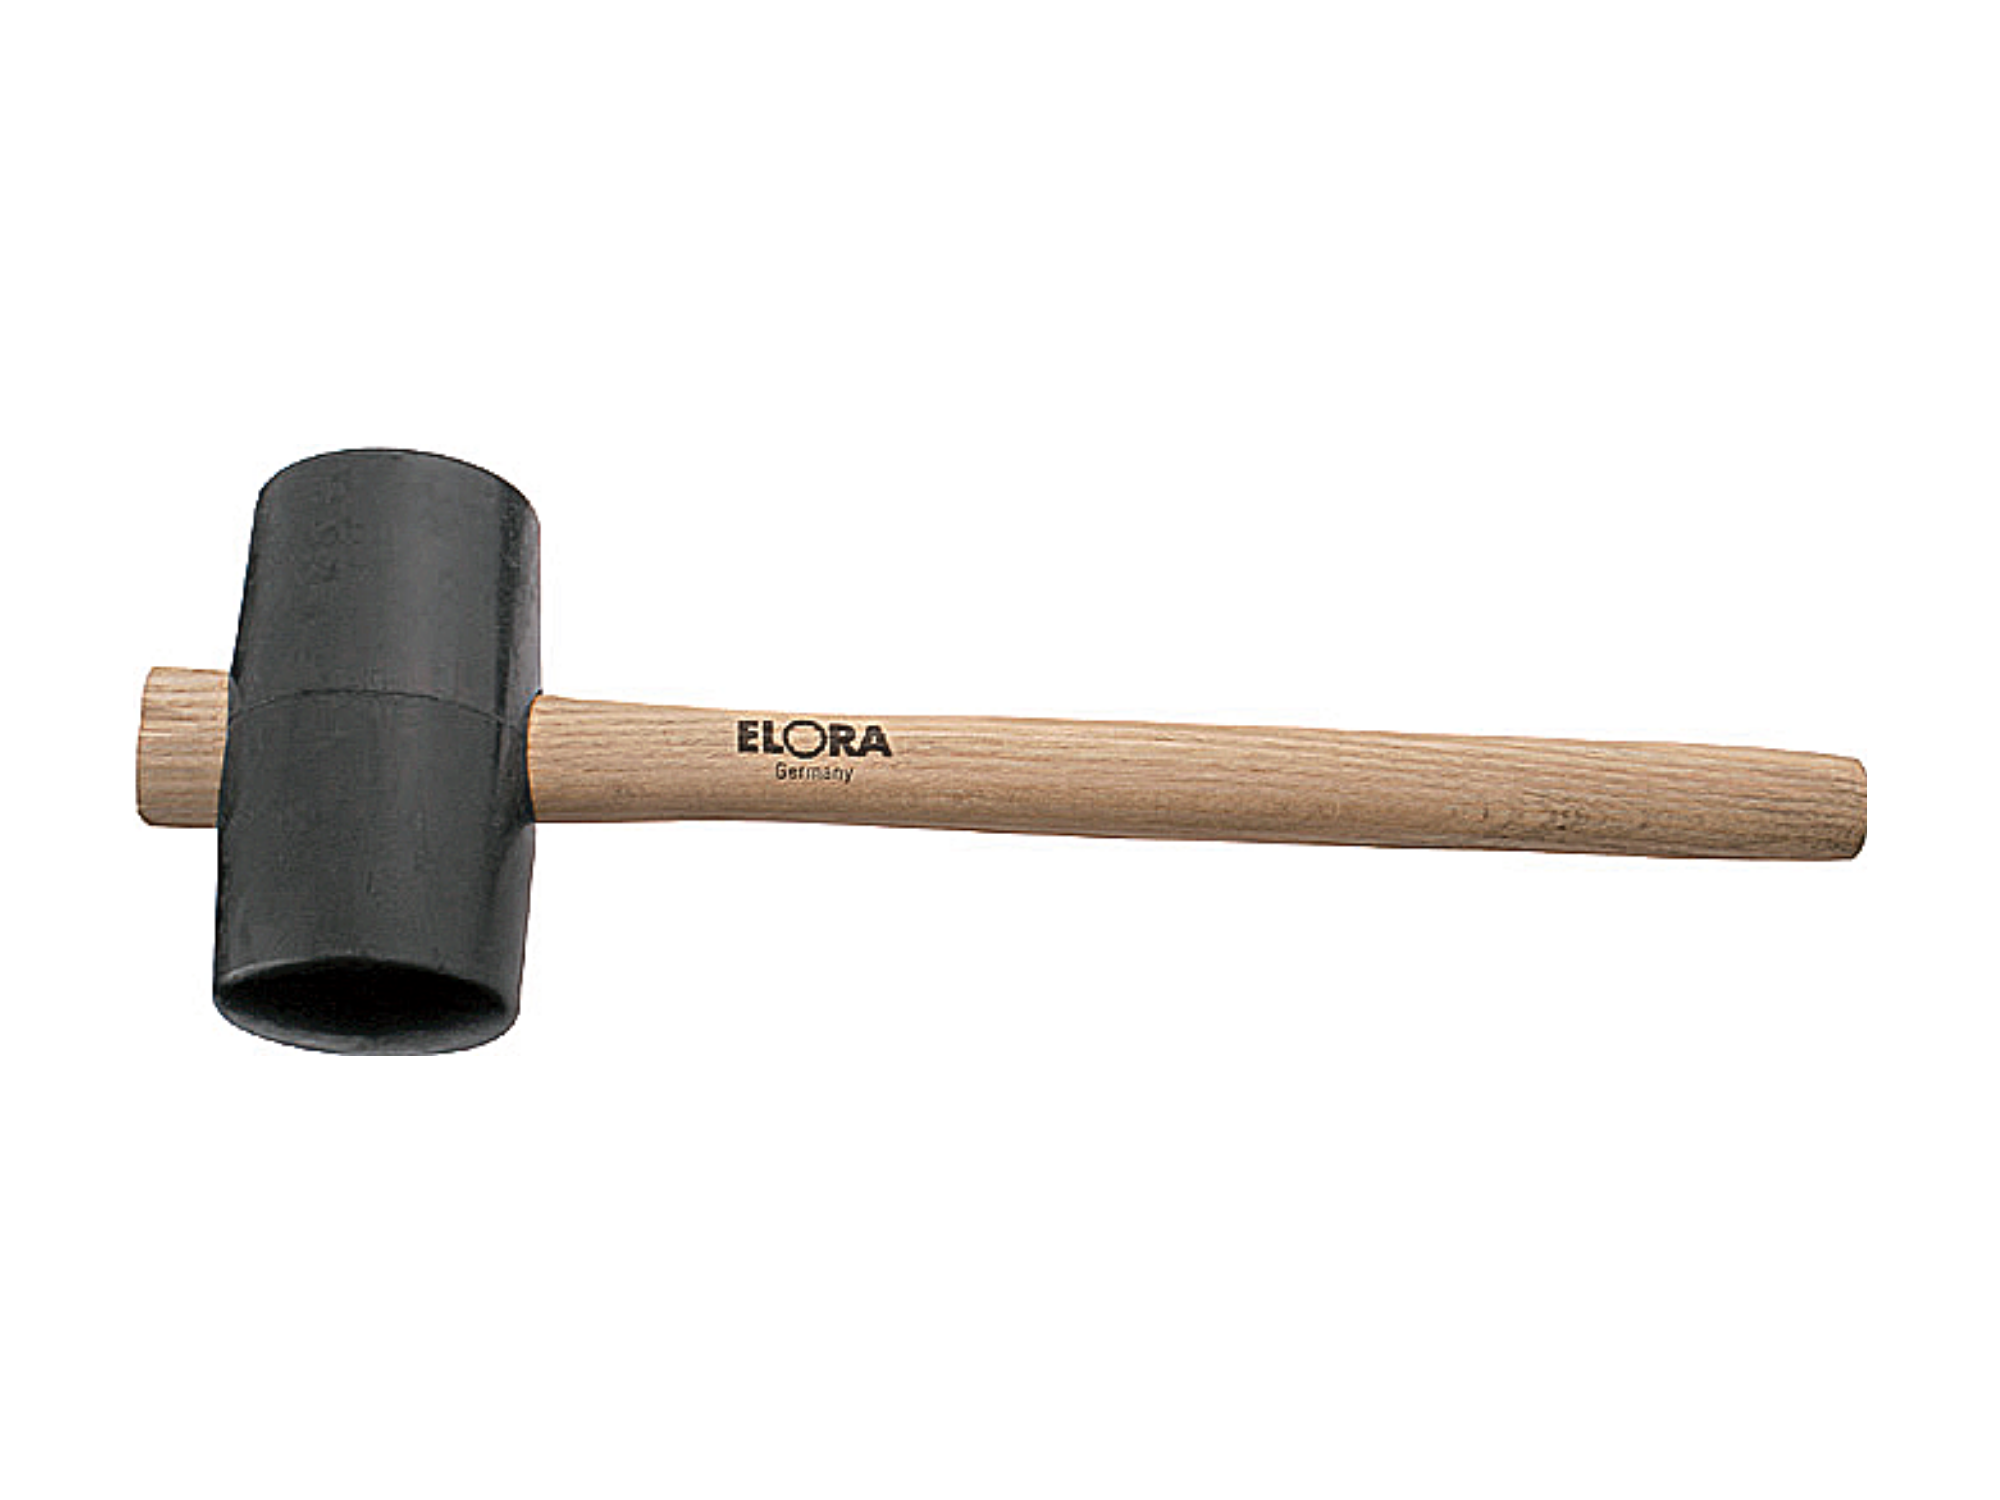 ELORA 1620 Rubber Mallet Ash Handle (ELORA Tools) - Premium Rubber Mallet from ELORA - Shop now at Yew Aik.